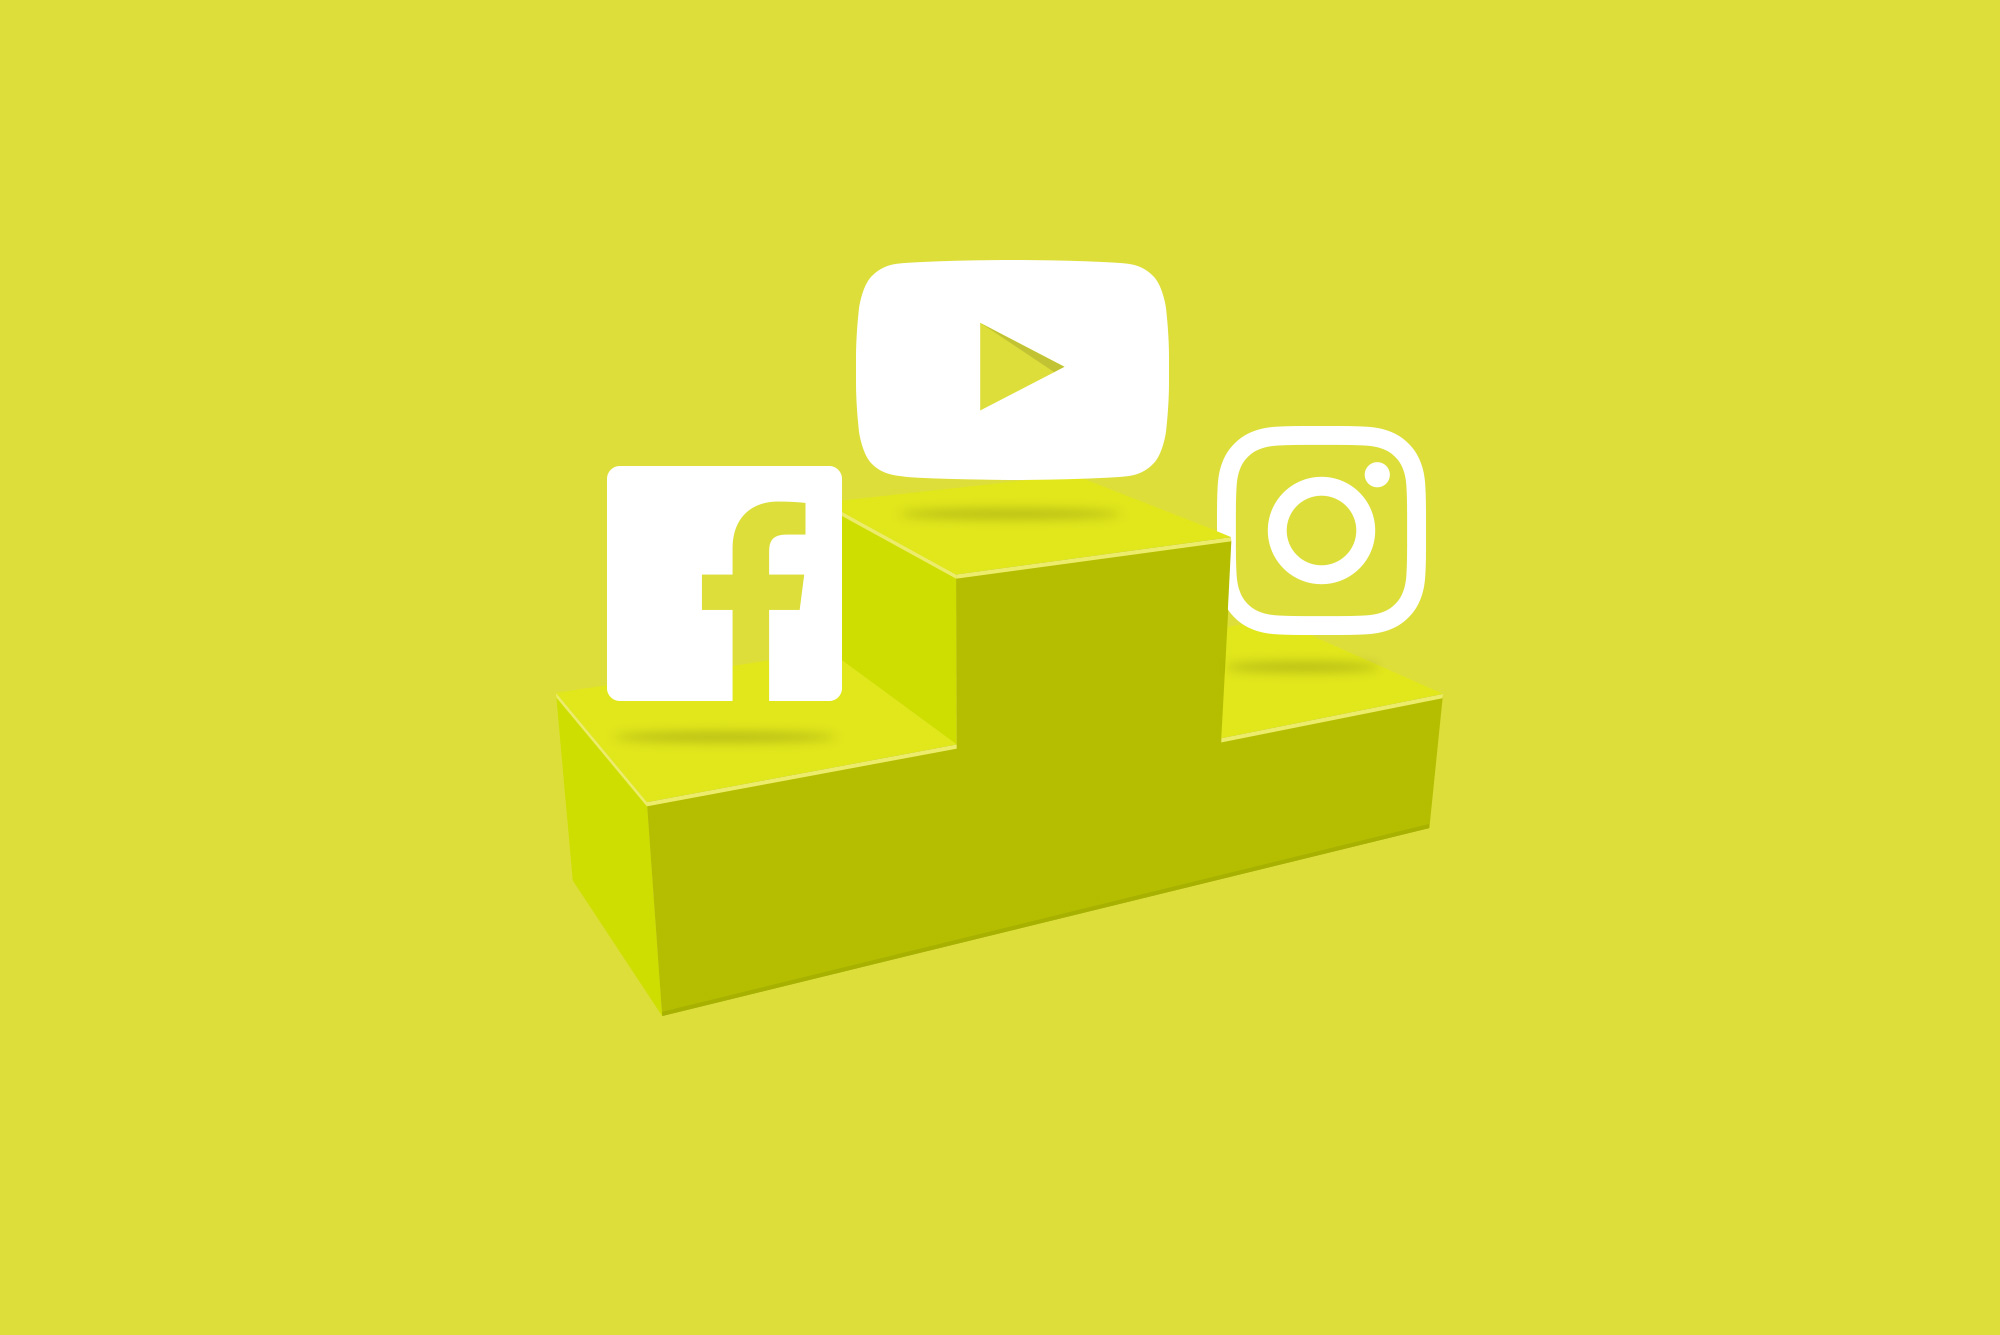 Facebook, YouTube and Instagram logos on a yellow podium